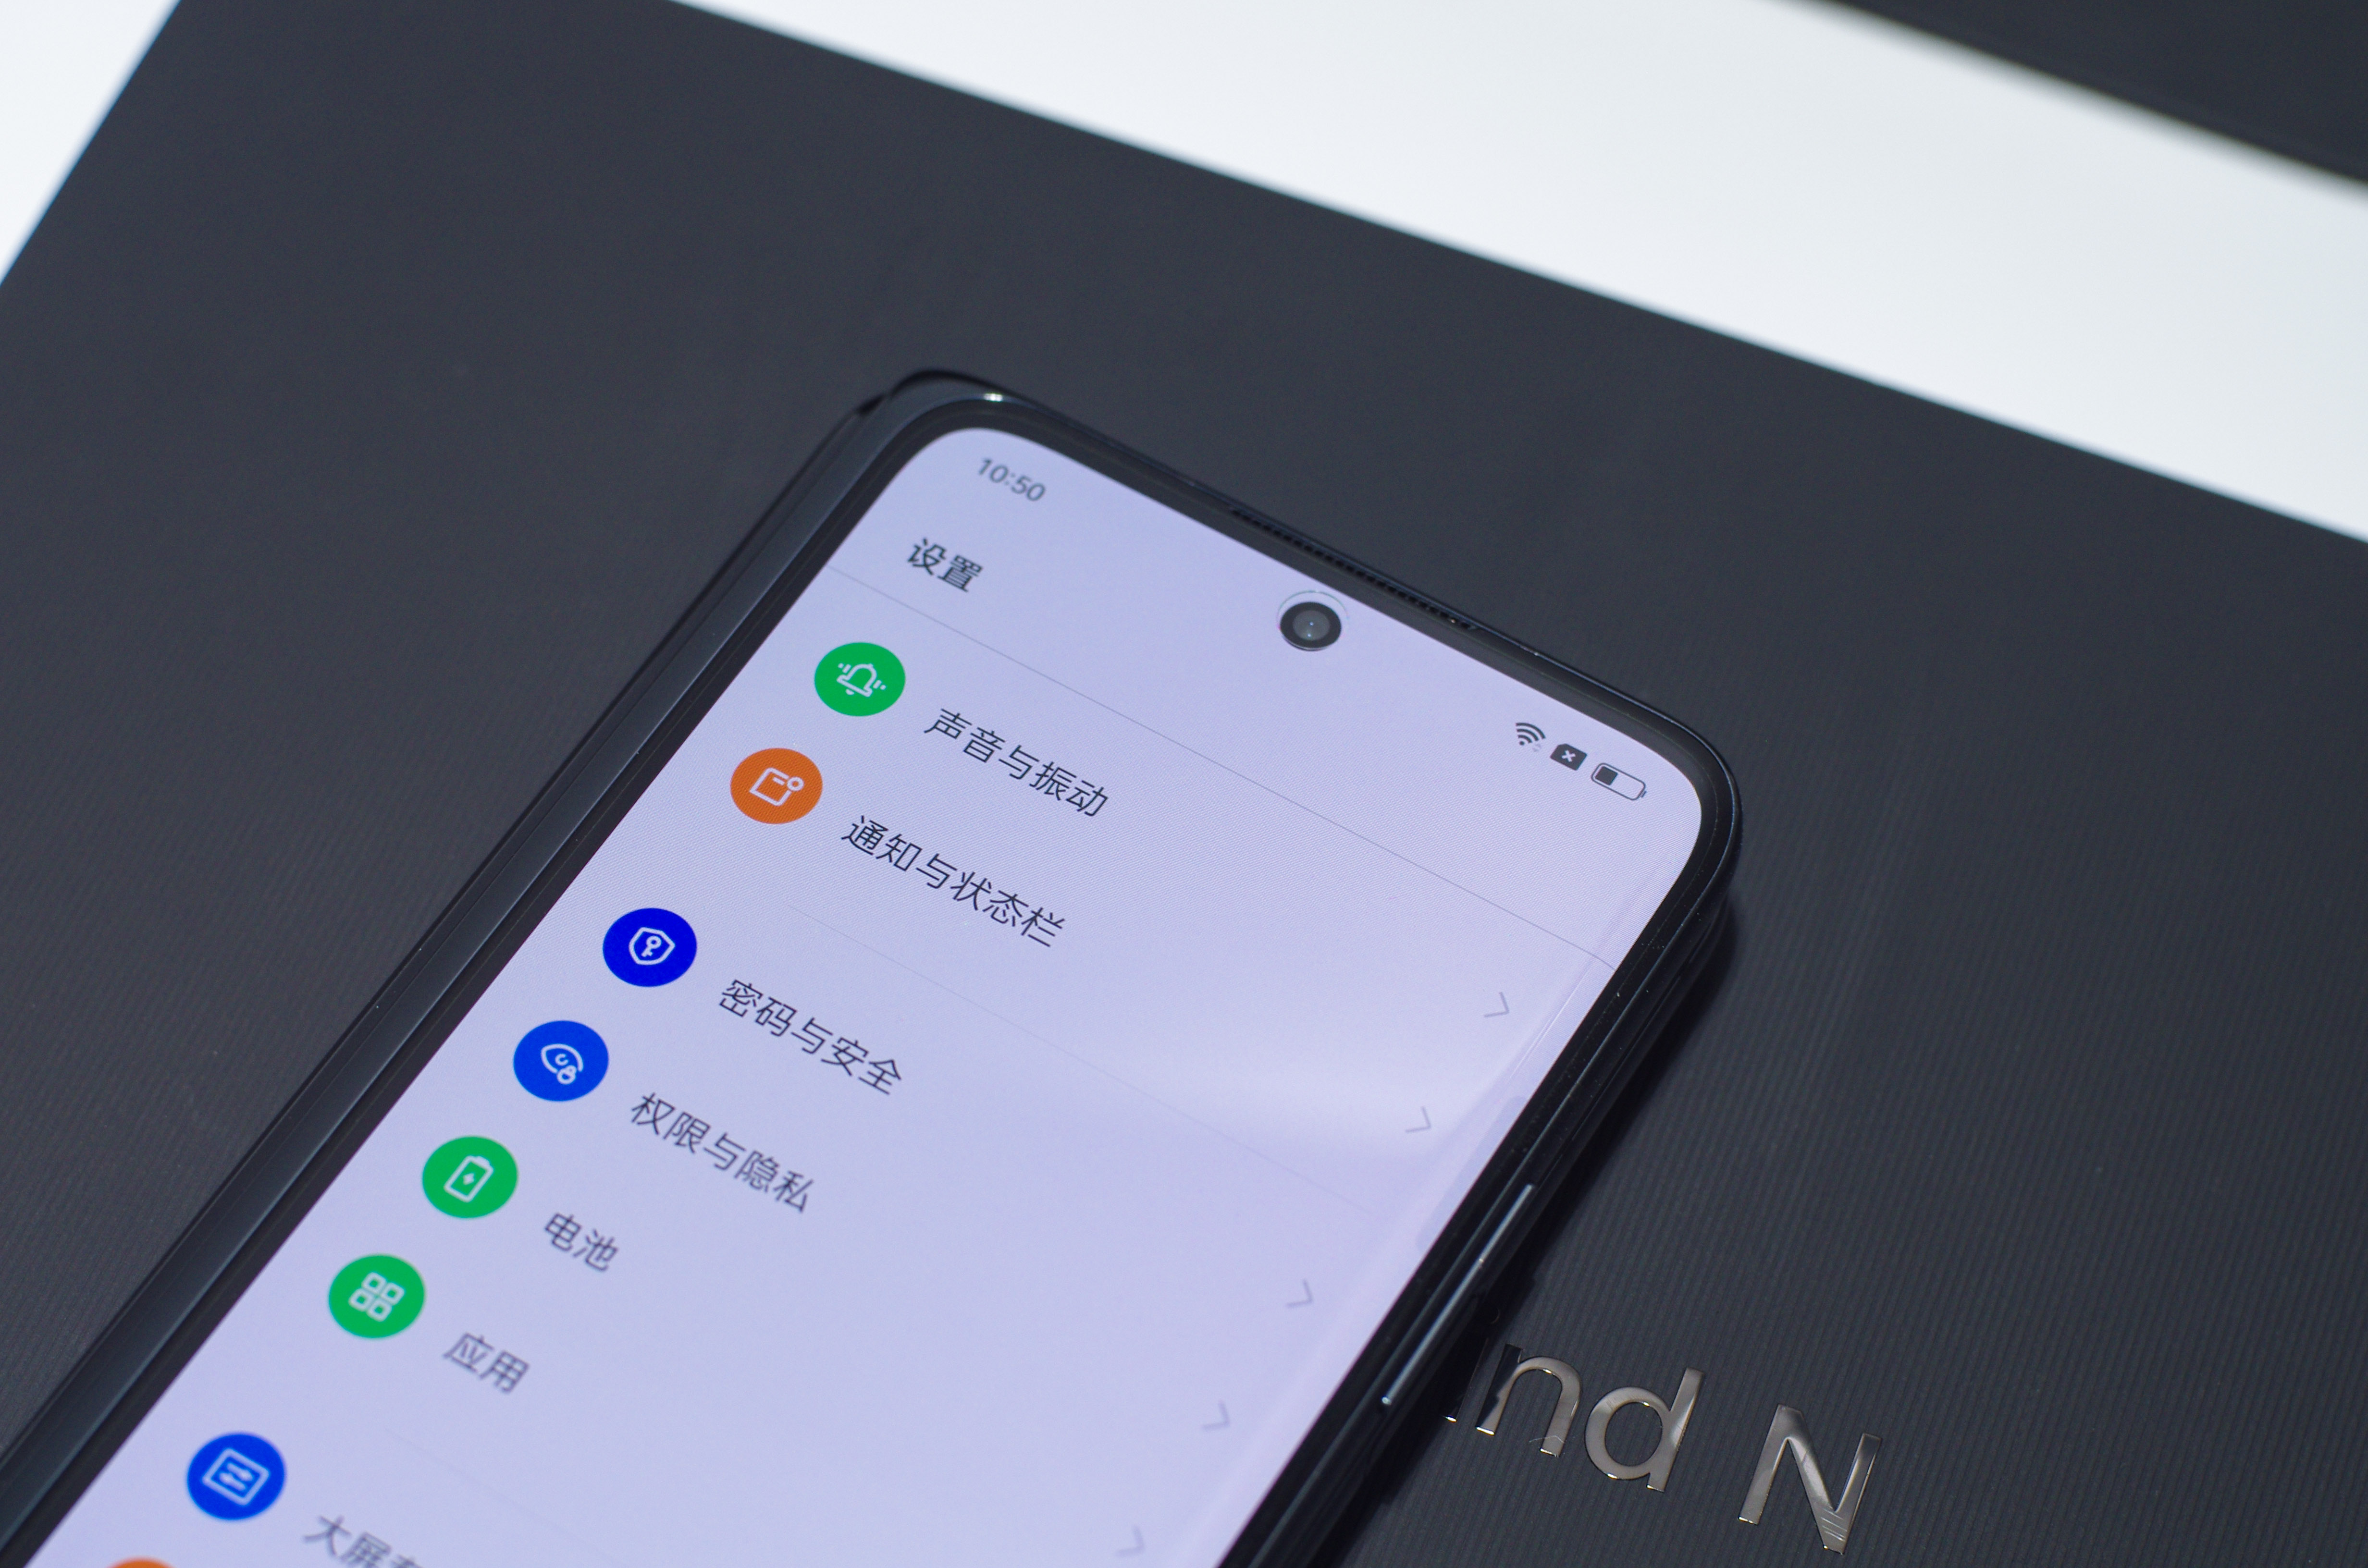 OPPO Find N first review: defining new form, unique new style